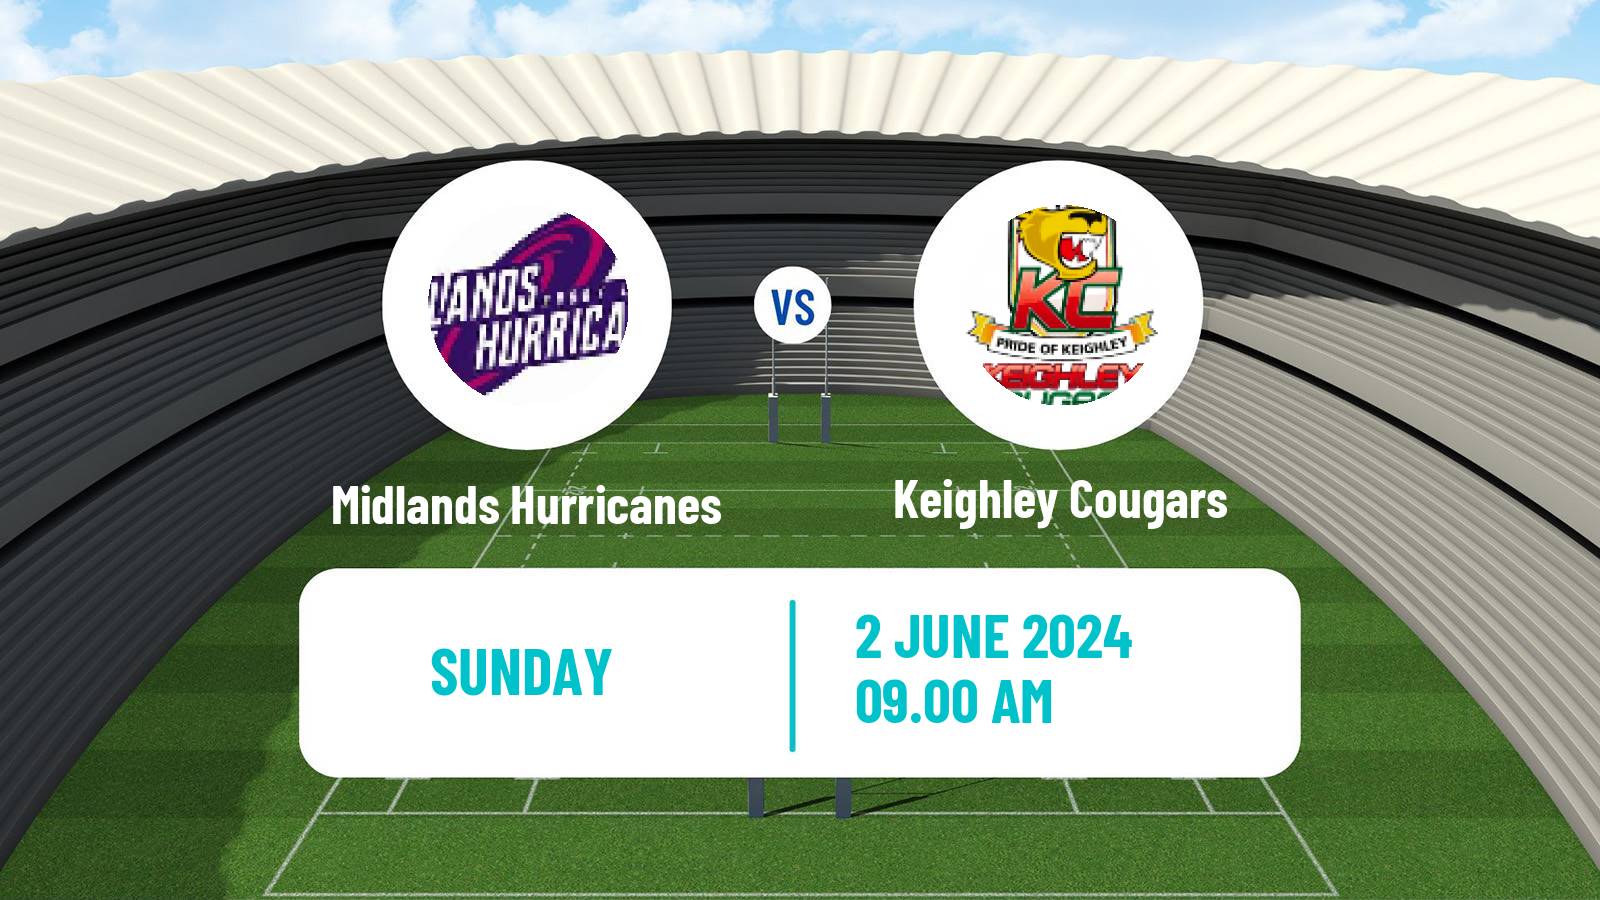 Rugby league English League 1 Rugby League Midlands Hurricanes - Keighley Cougars